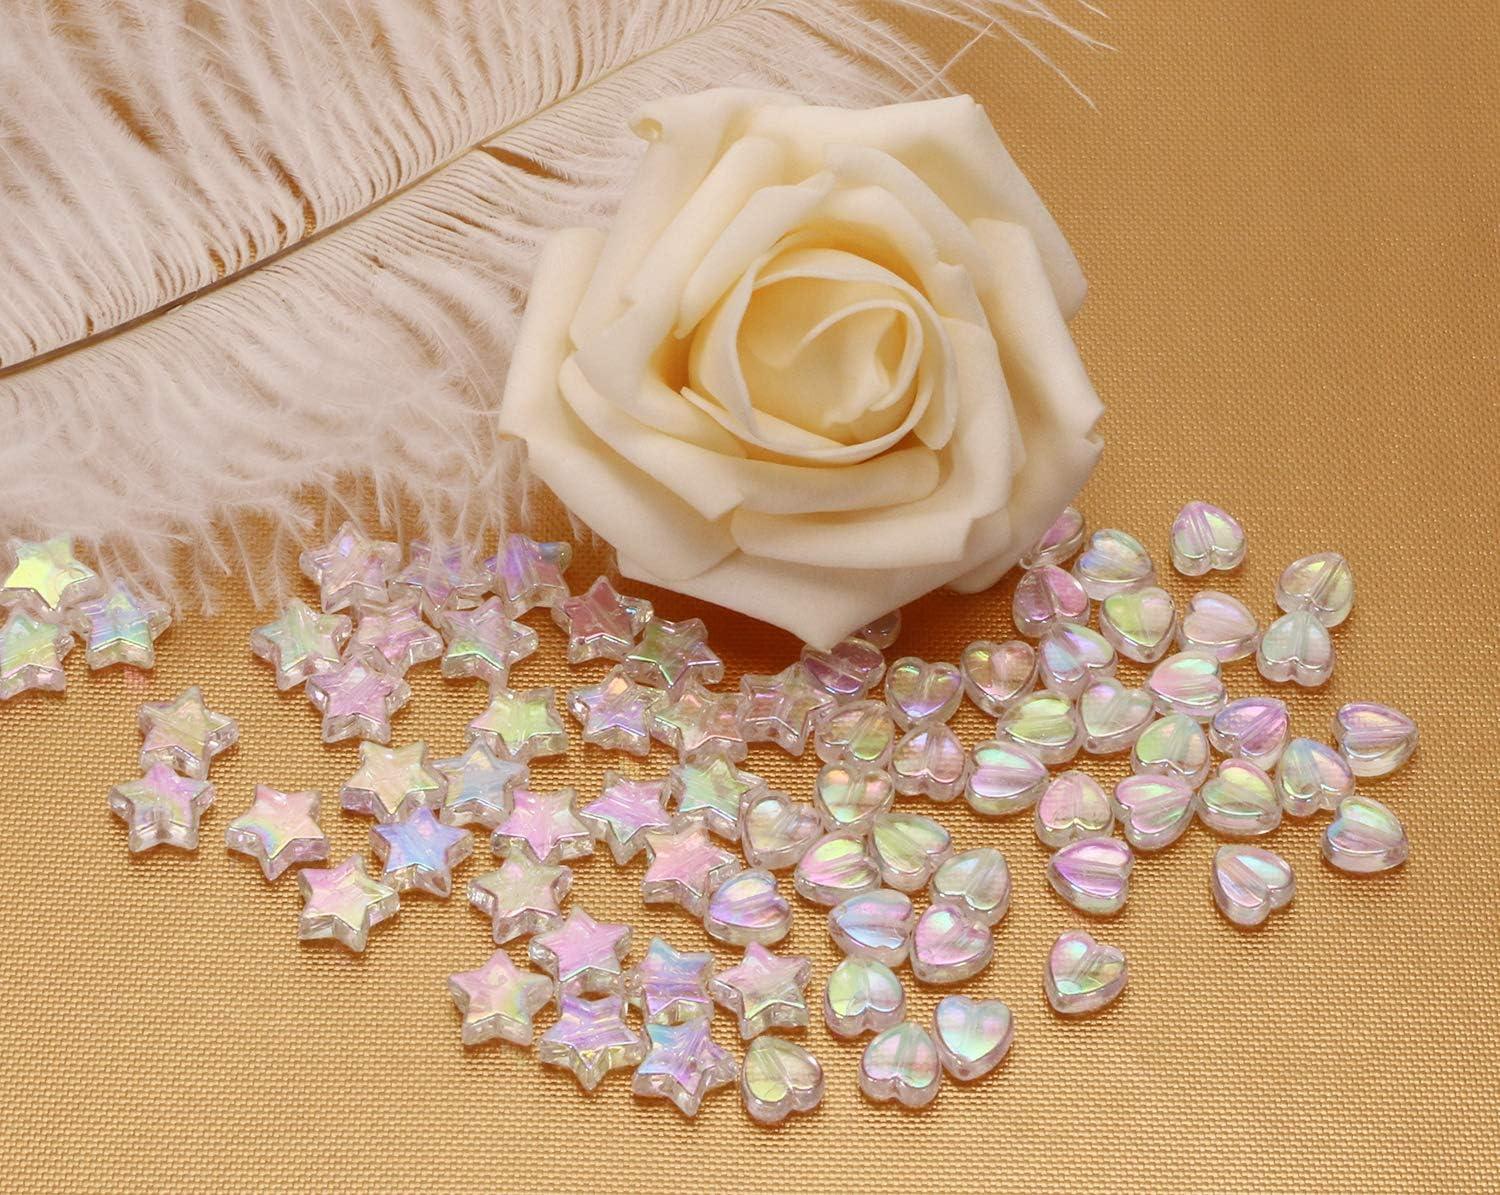 Tupalizy 100PCS Mini Acrylic Beads 9mm Heart Charms and 11mm Star Beads for Jewelry  Making Bracelets Necklaces Earrings Key Chains Accessories DIY Crafts  Valentine Christmas Birthday Gifts (White)